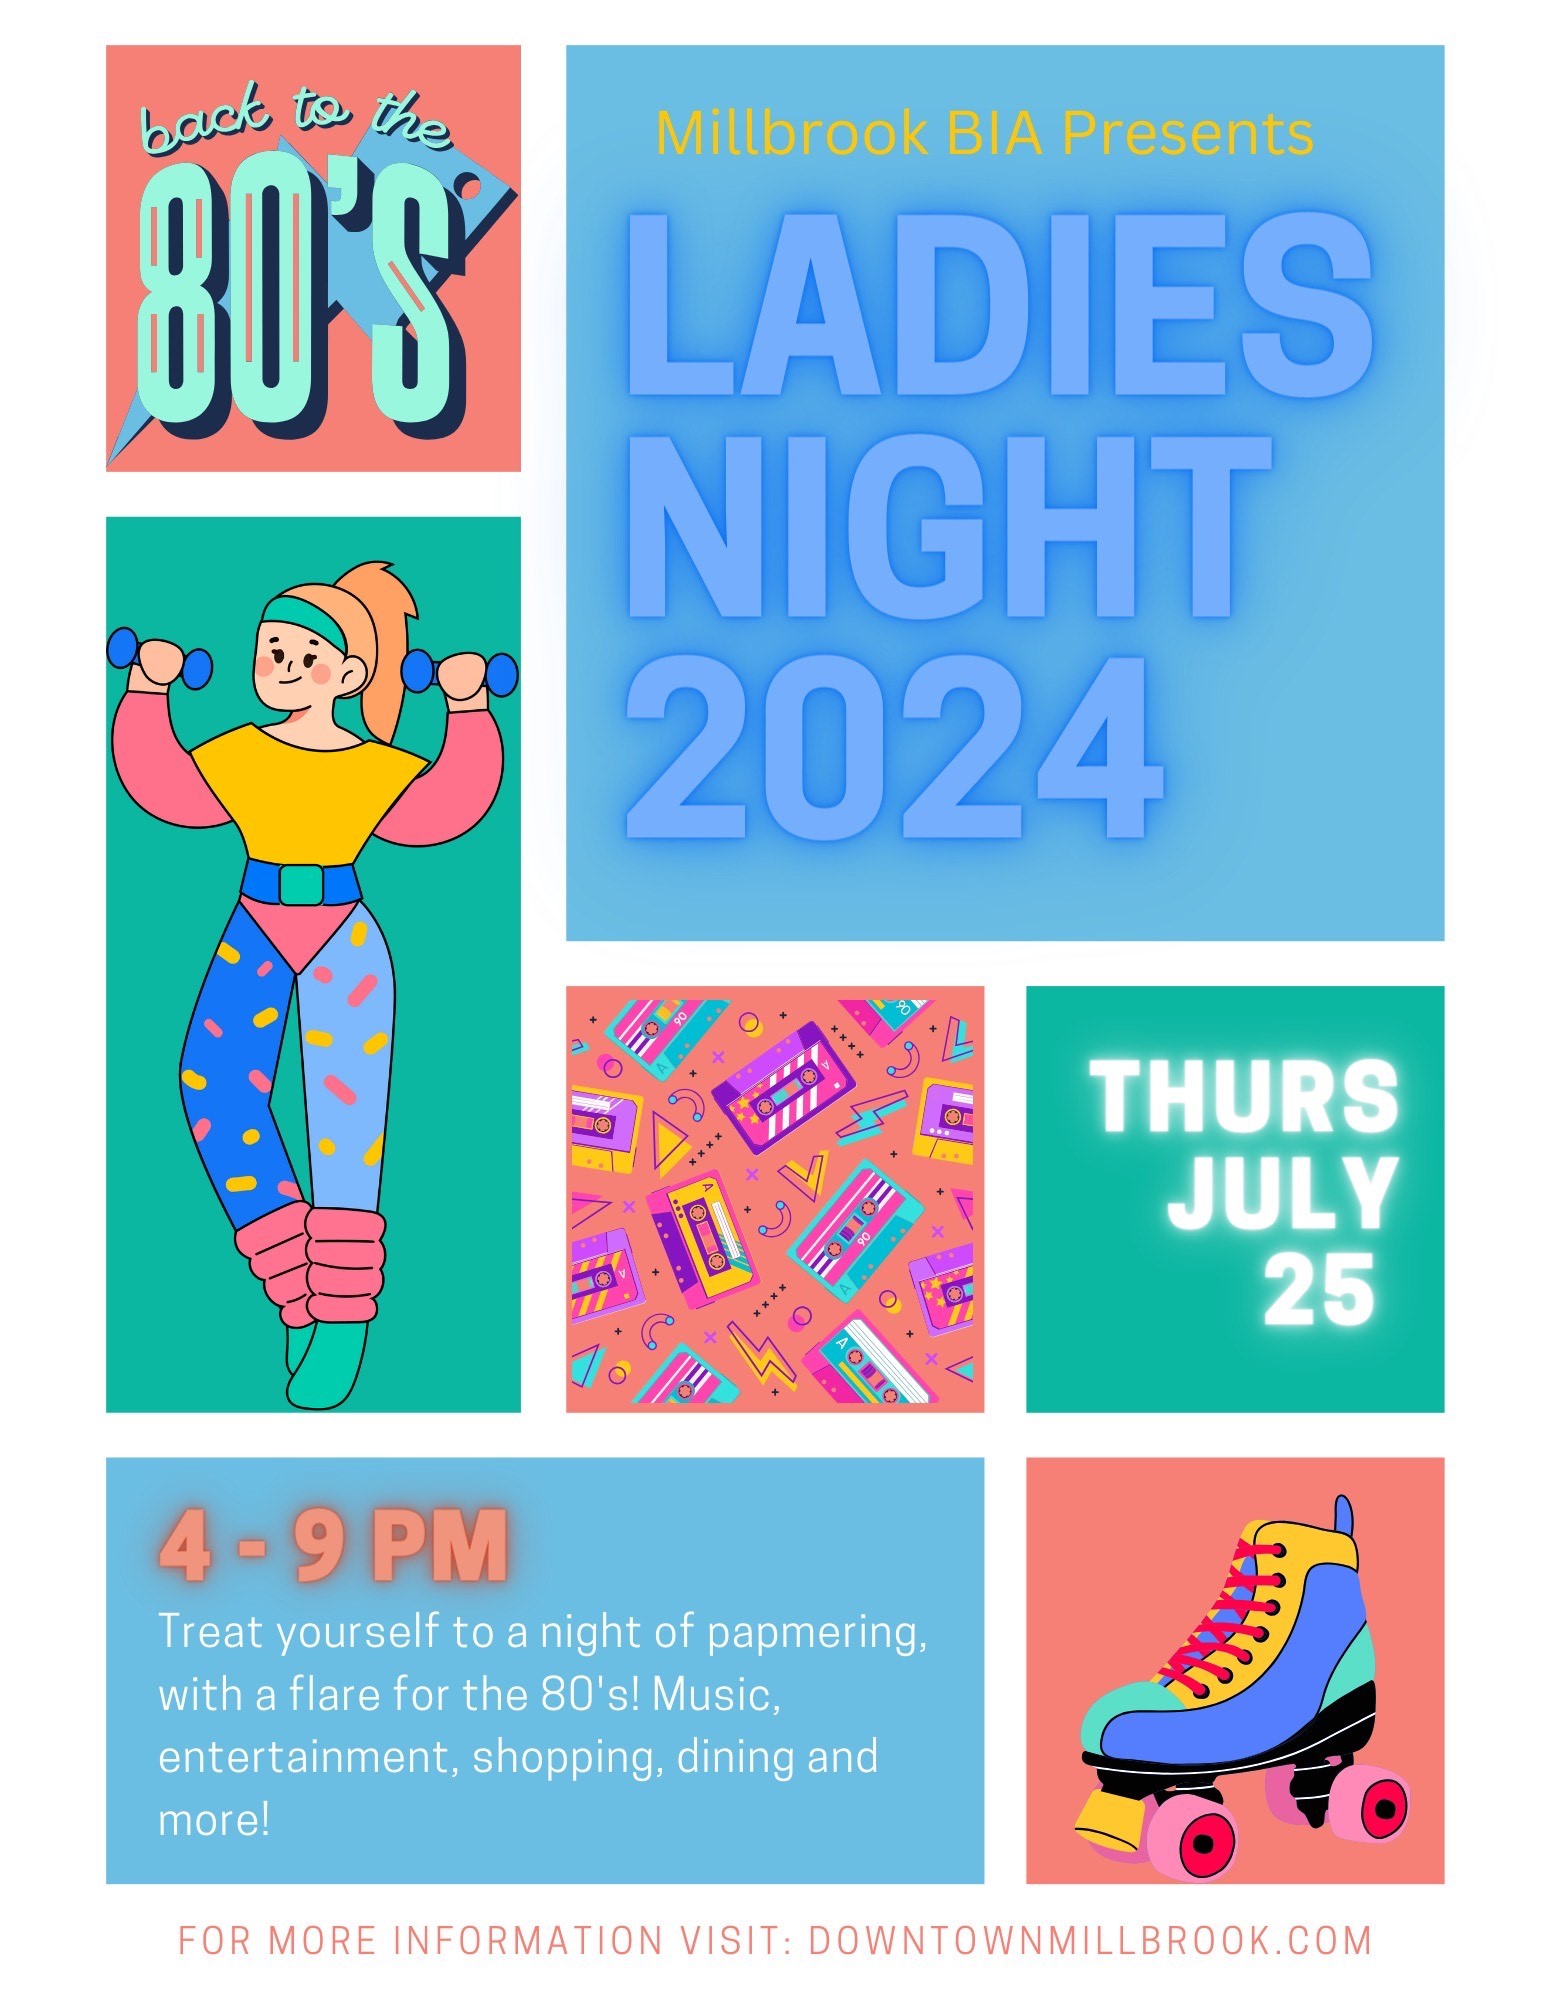 Ladies Night Poster; back to the 80's; Thursday July 25; 4pm-9pm